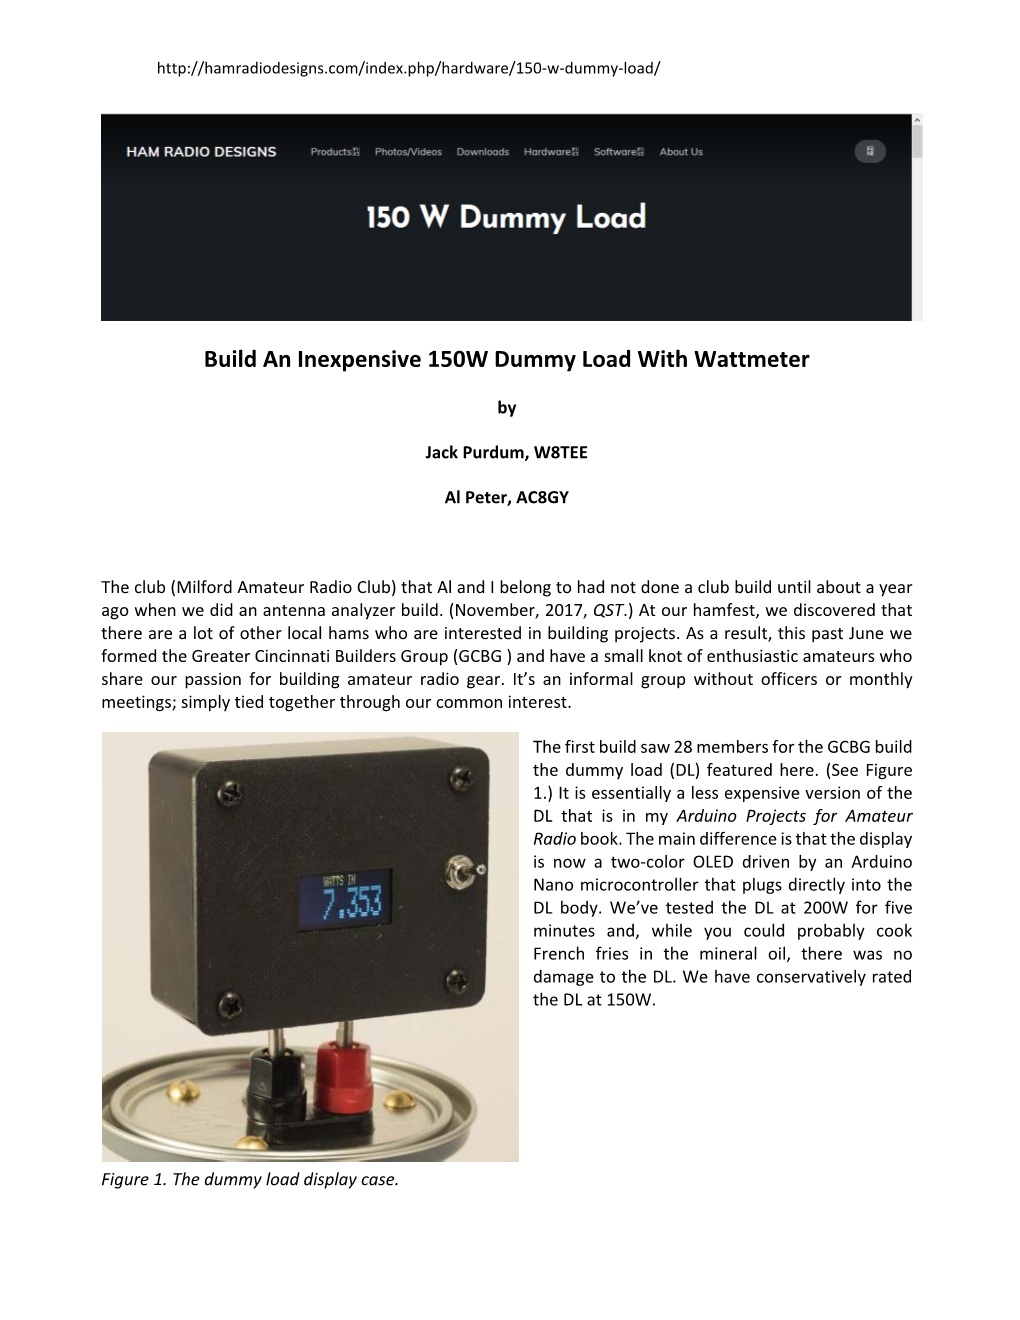 Build an Inexpensive 150W Dummy Load with Wattmeter